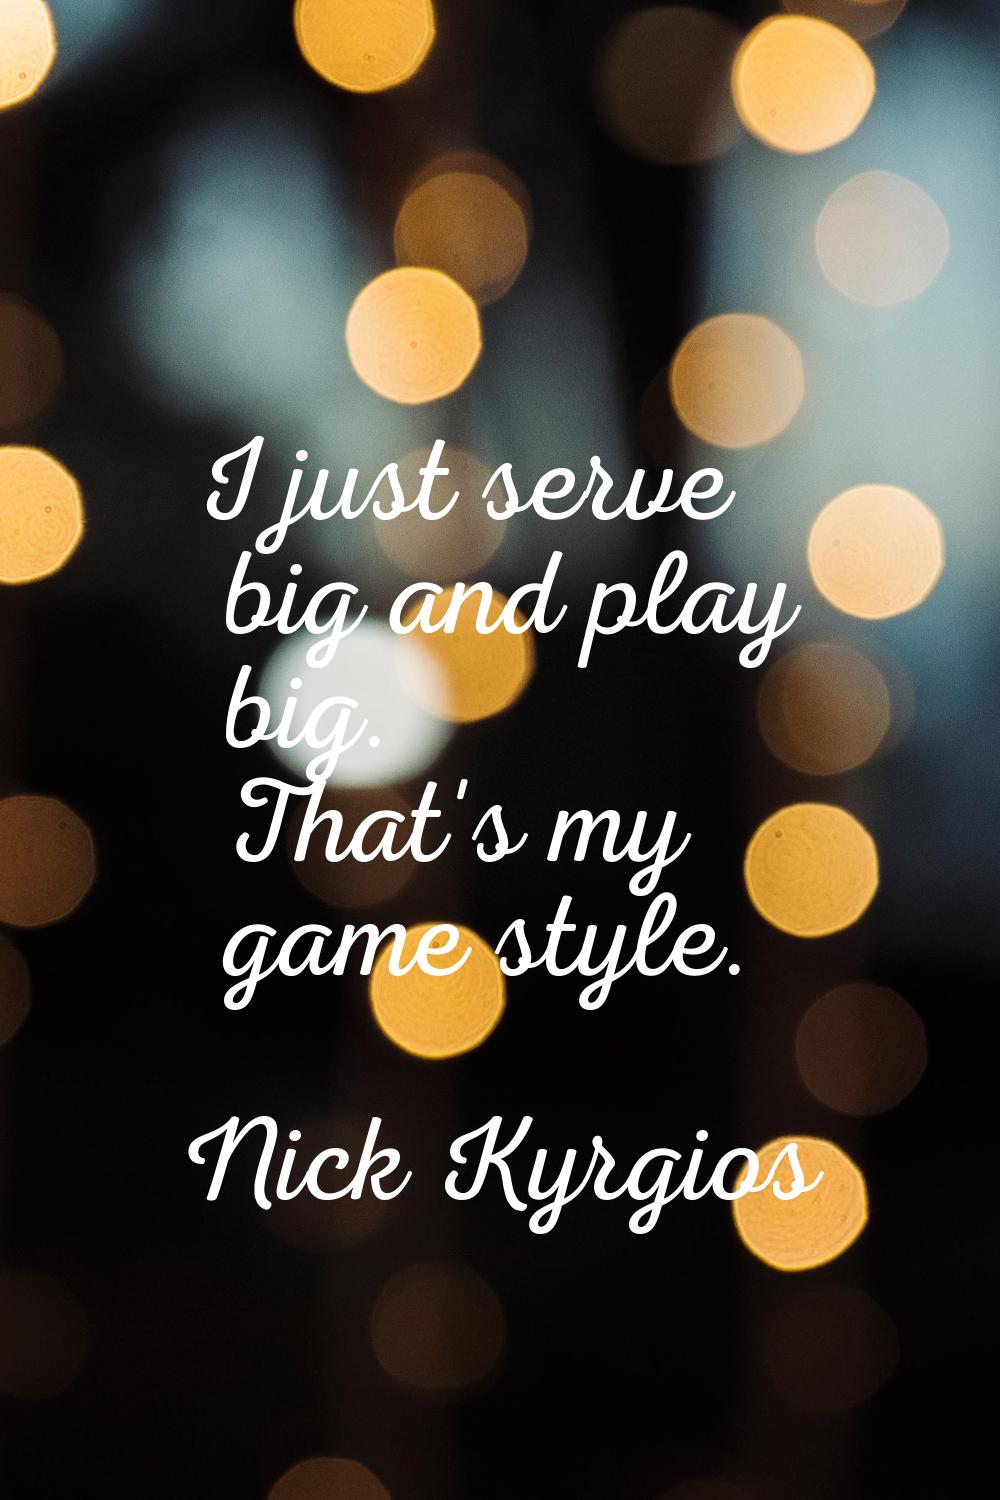 I just serve big and play big. That's my game style.